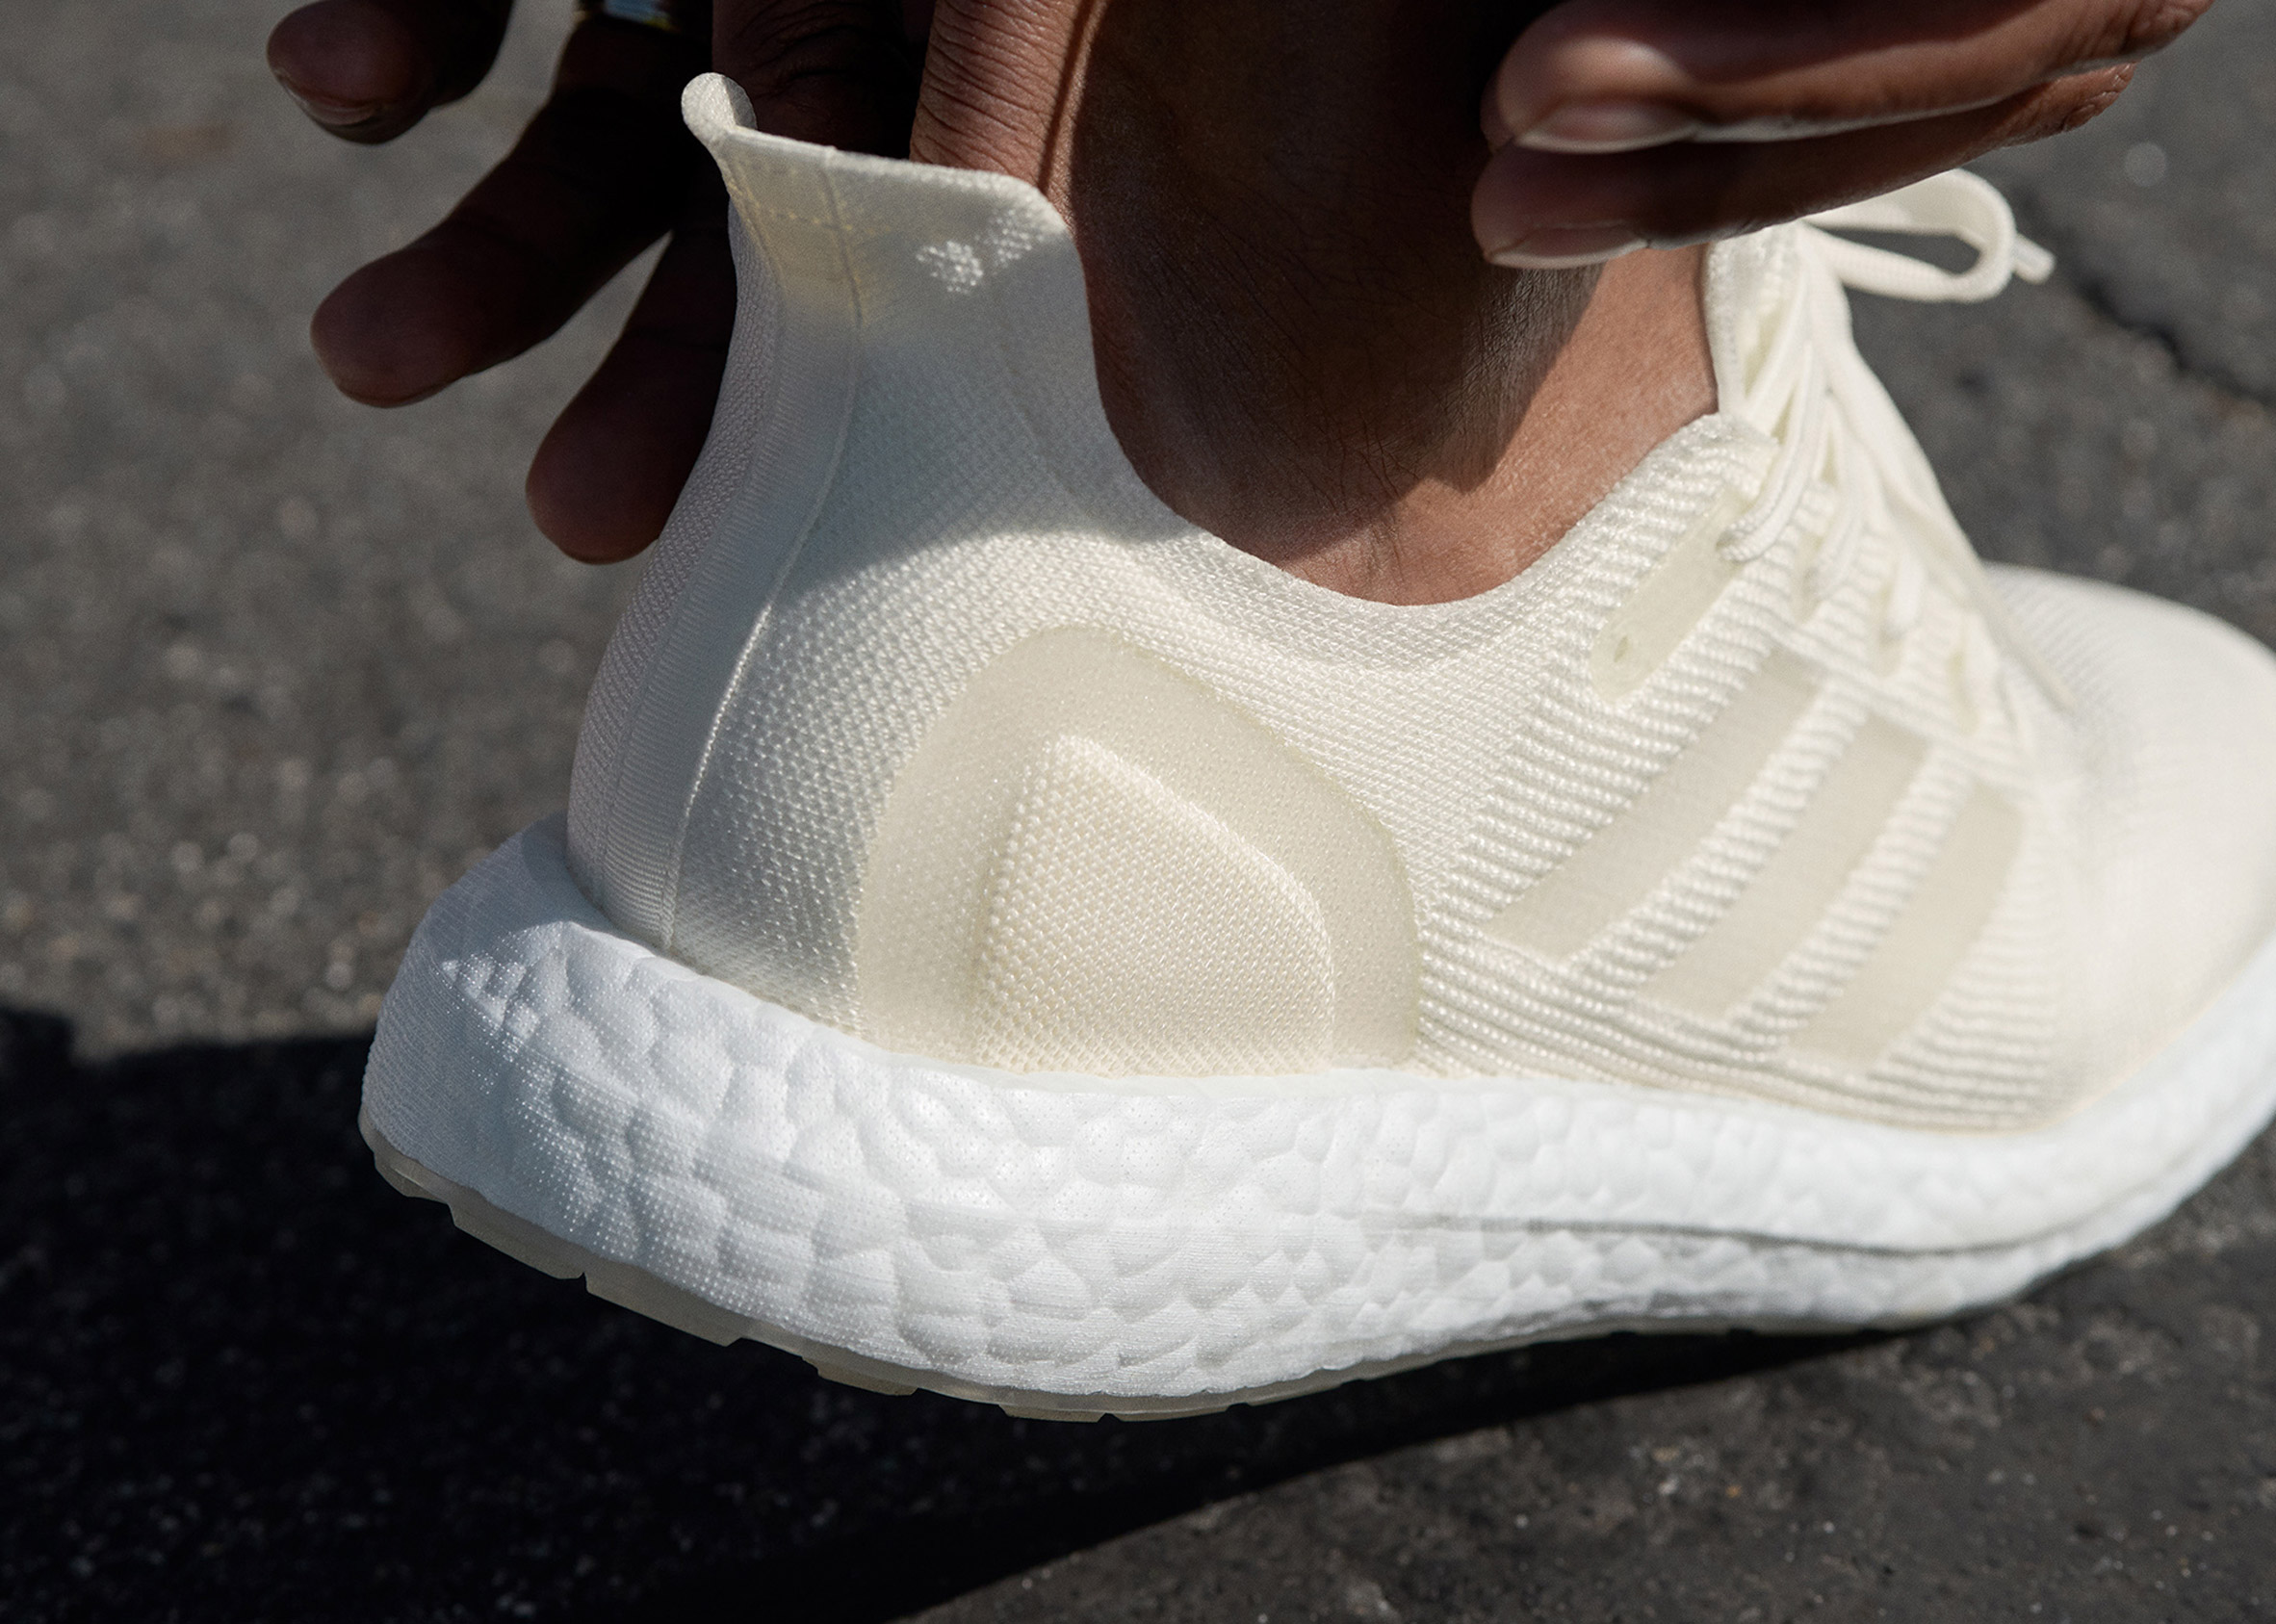 Adidas unveils fully recyclable Loop sneaker